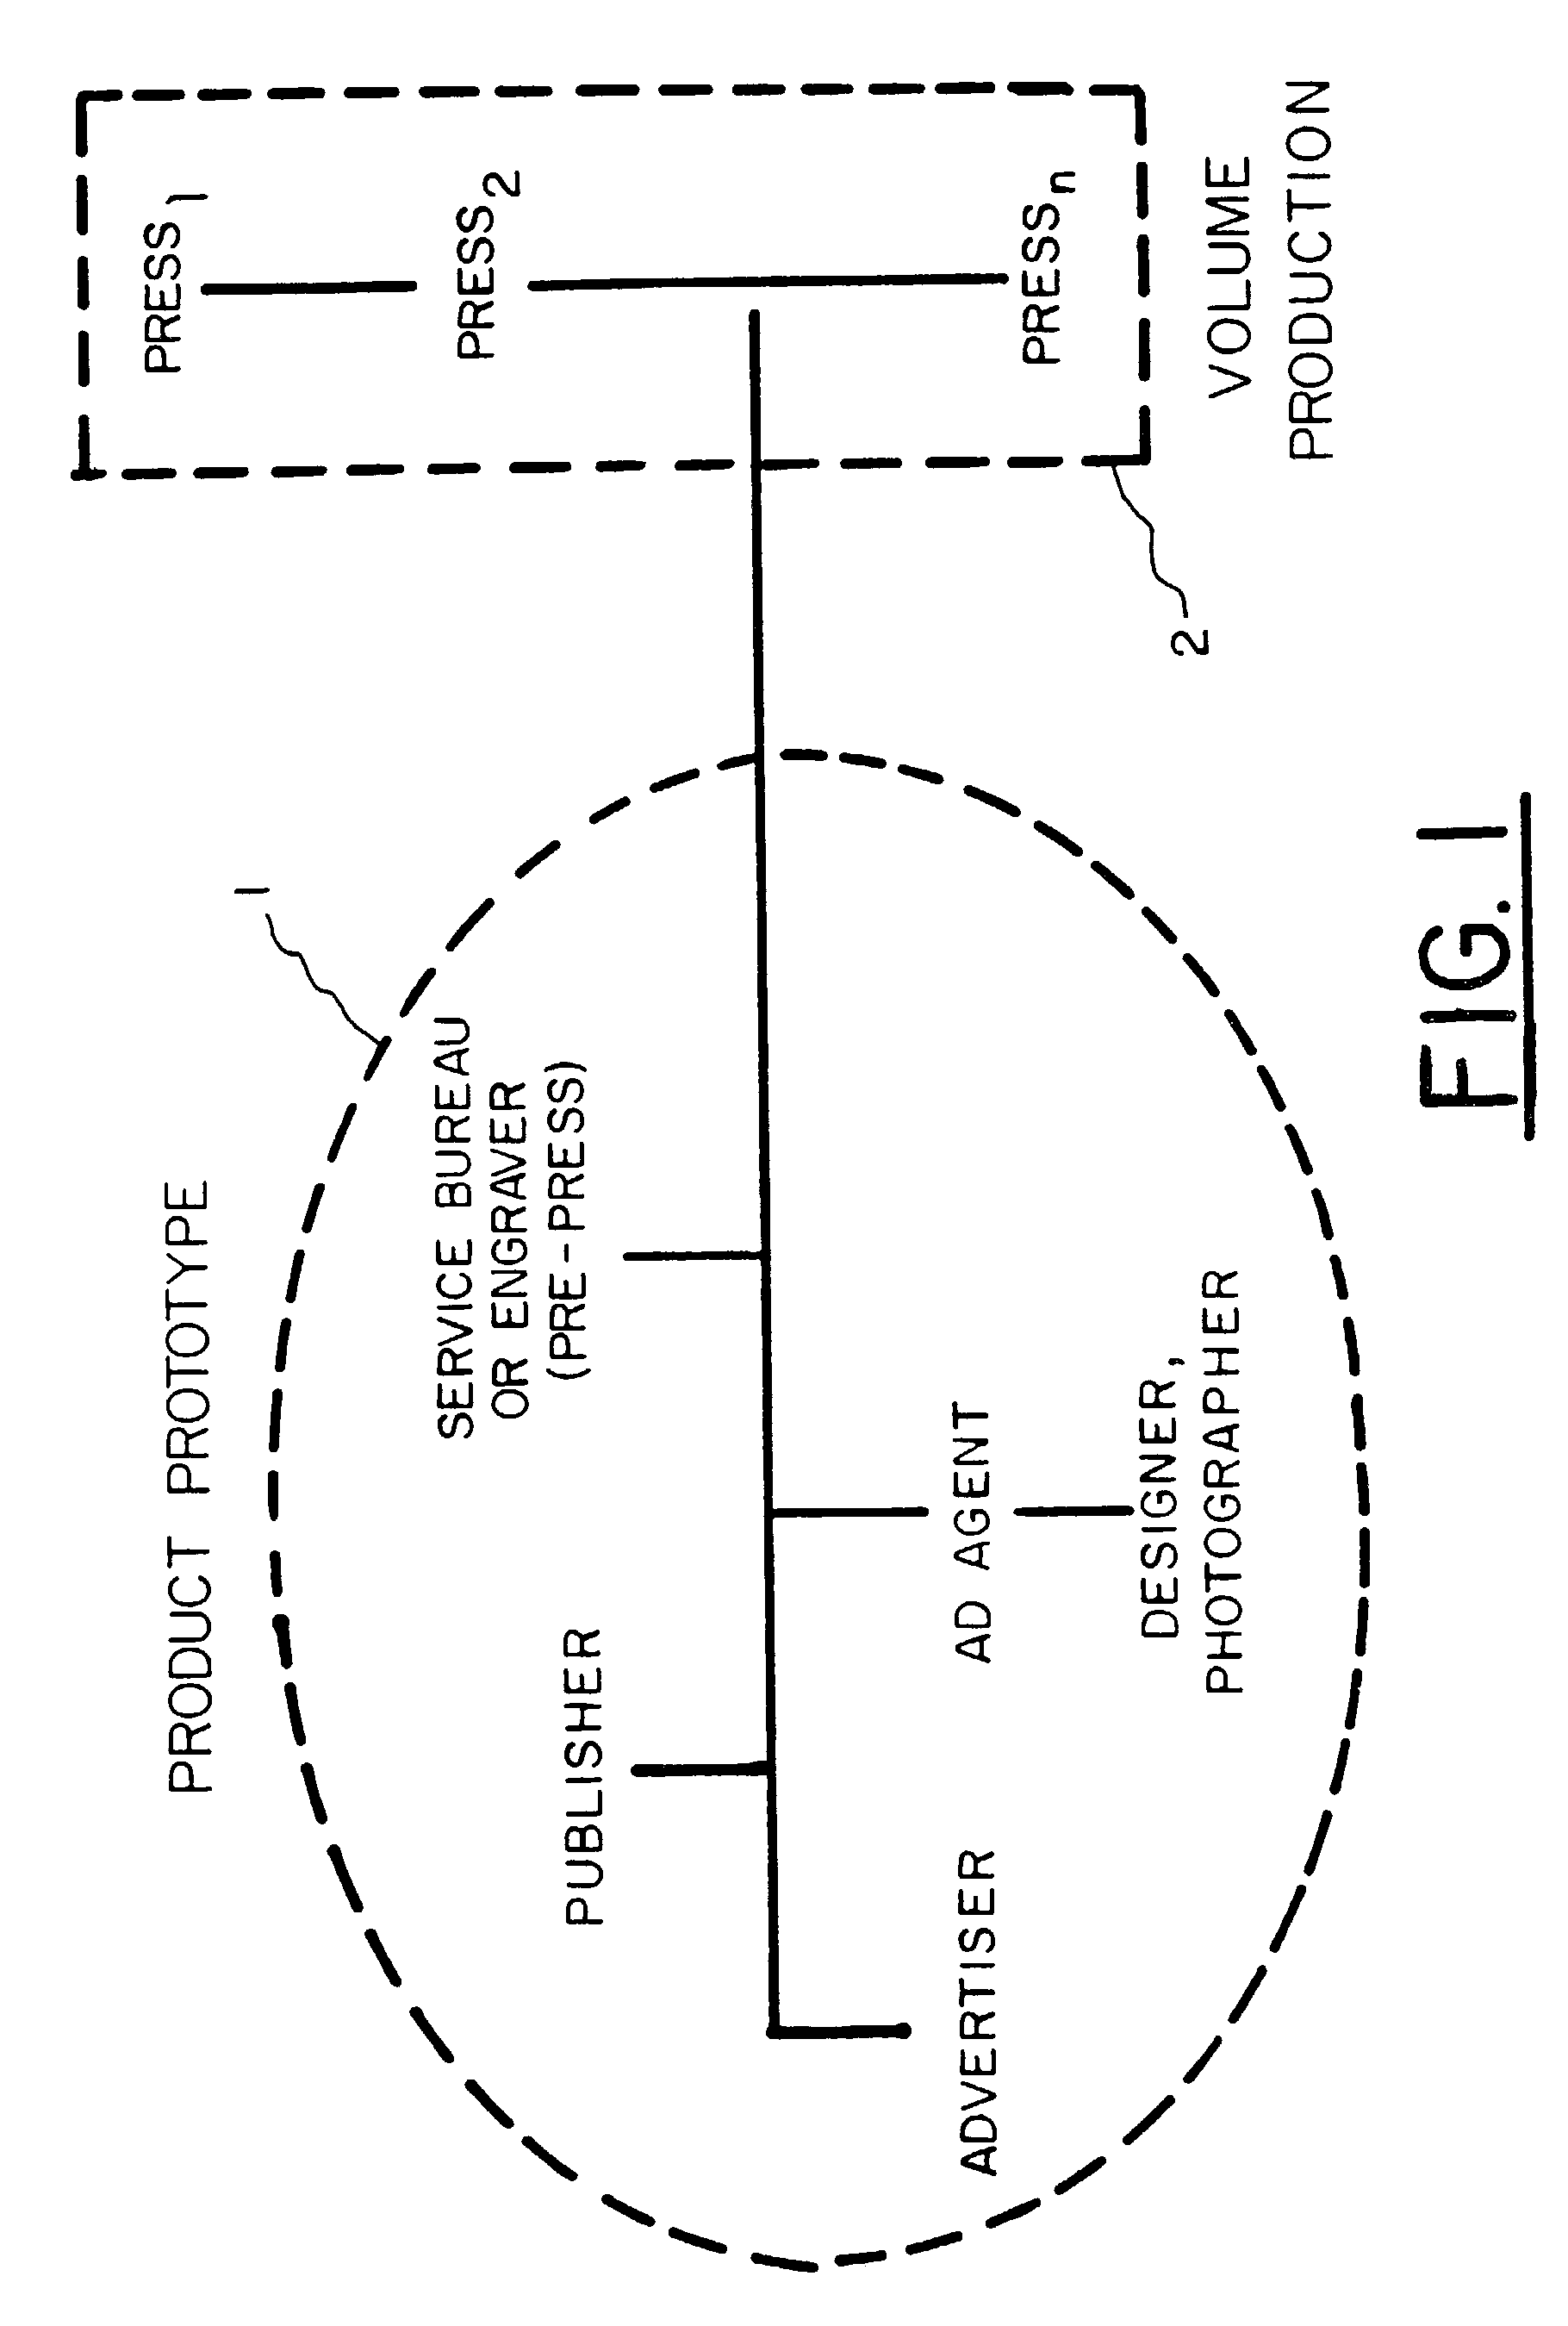 System for distributing and controlling color reproduction at multiple sites